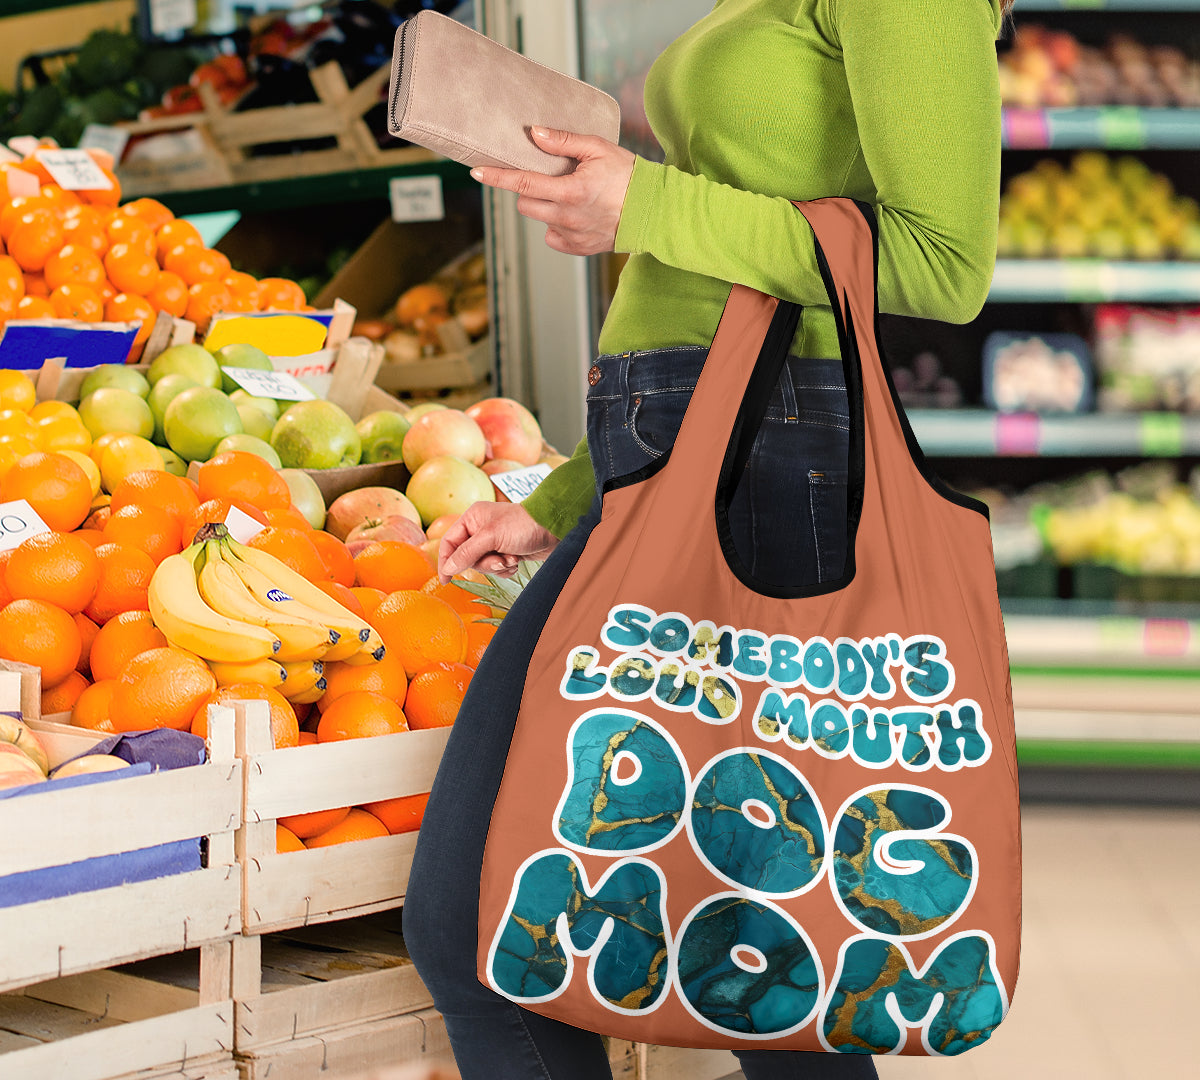 Somebody's Loud Mouth Dog Mom Turquoise Marble Design 3 Pack Grocery Bags - Mom and Dad Collection